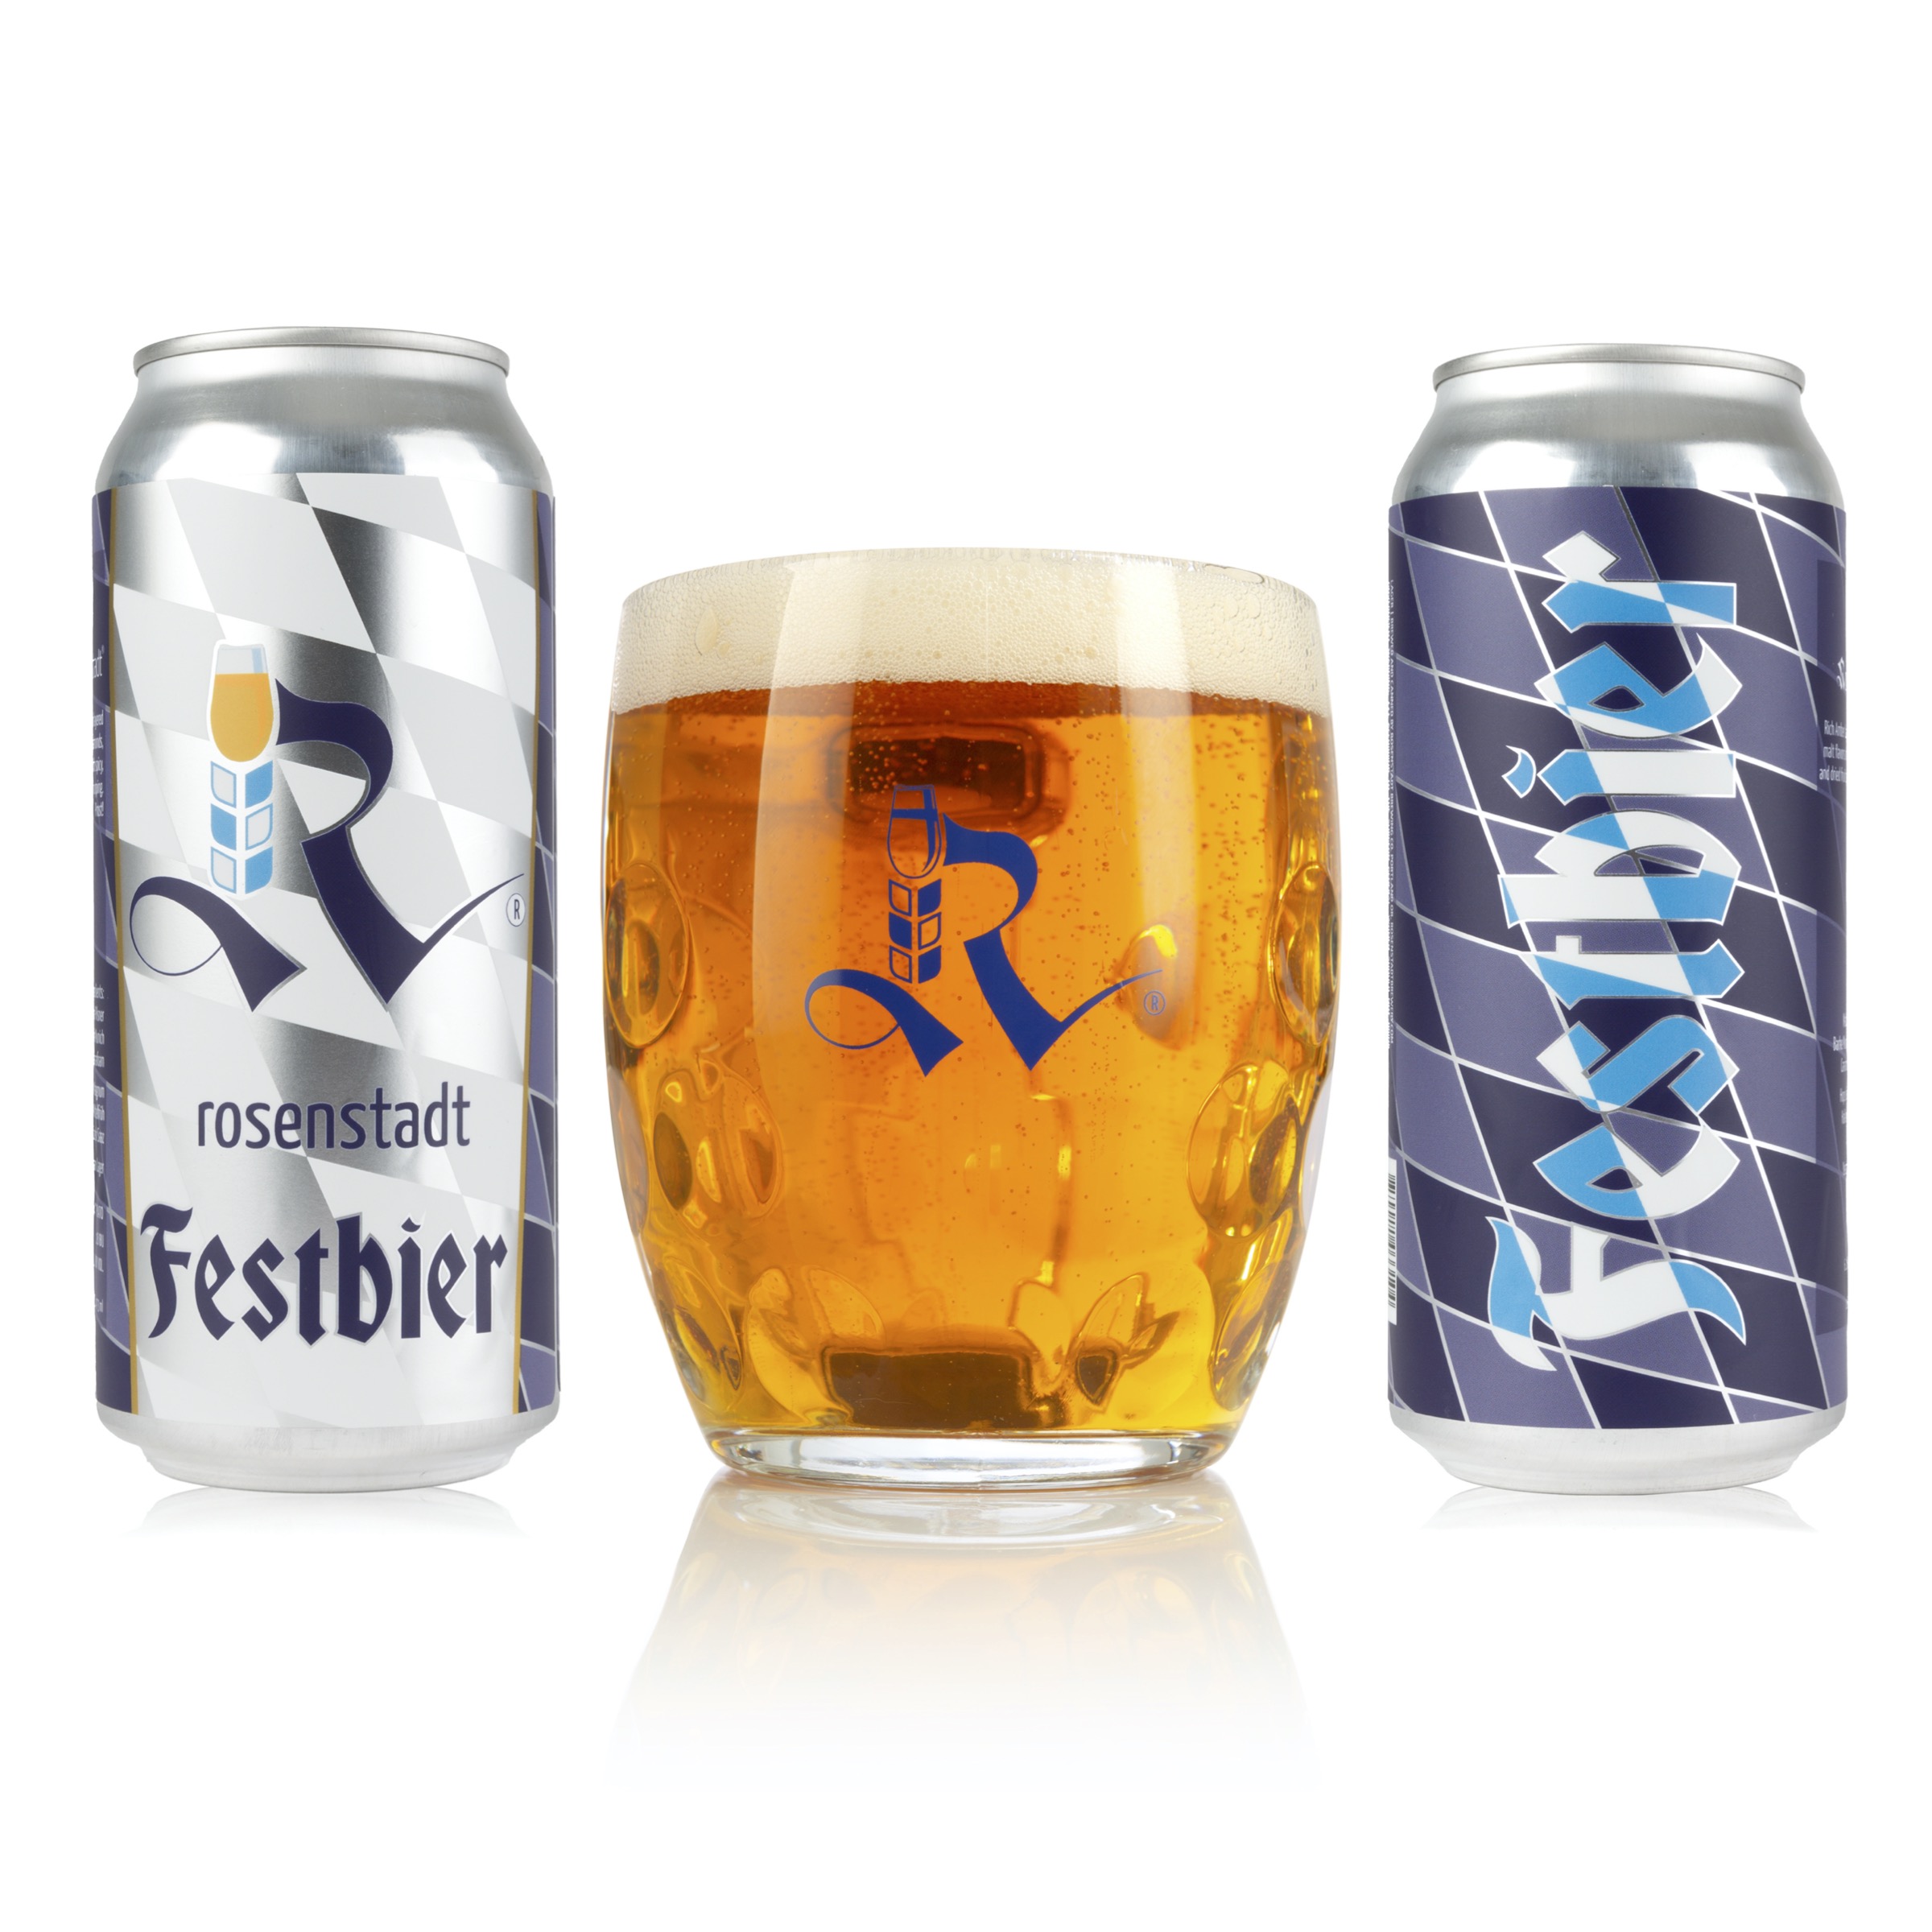 Rosenstadt Brewery has released its Festbier for 2021 in 16oz cans and on draft.